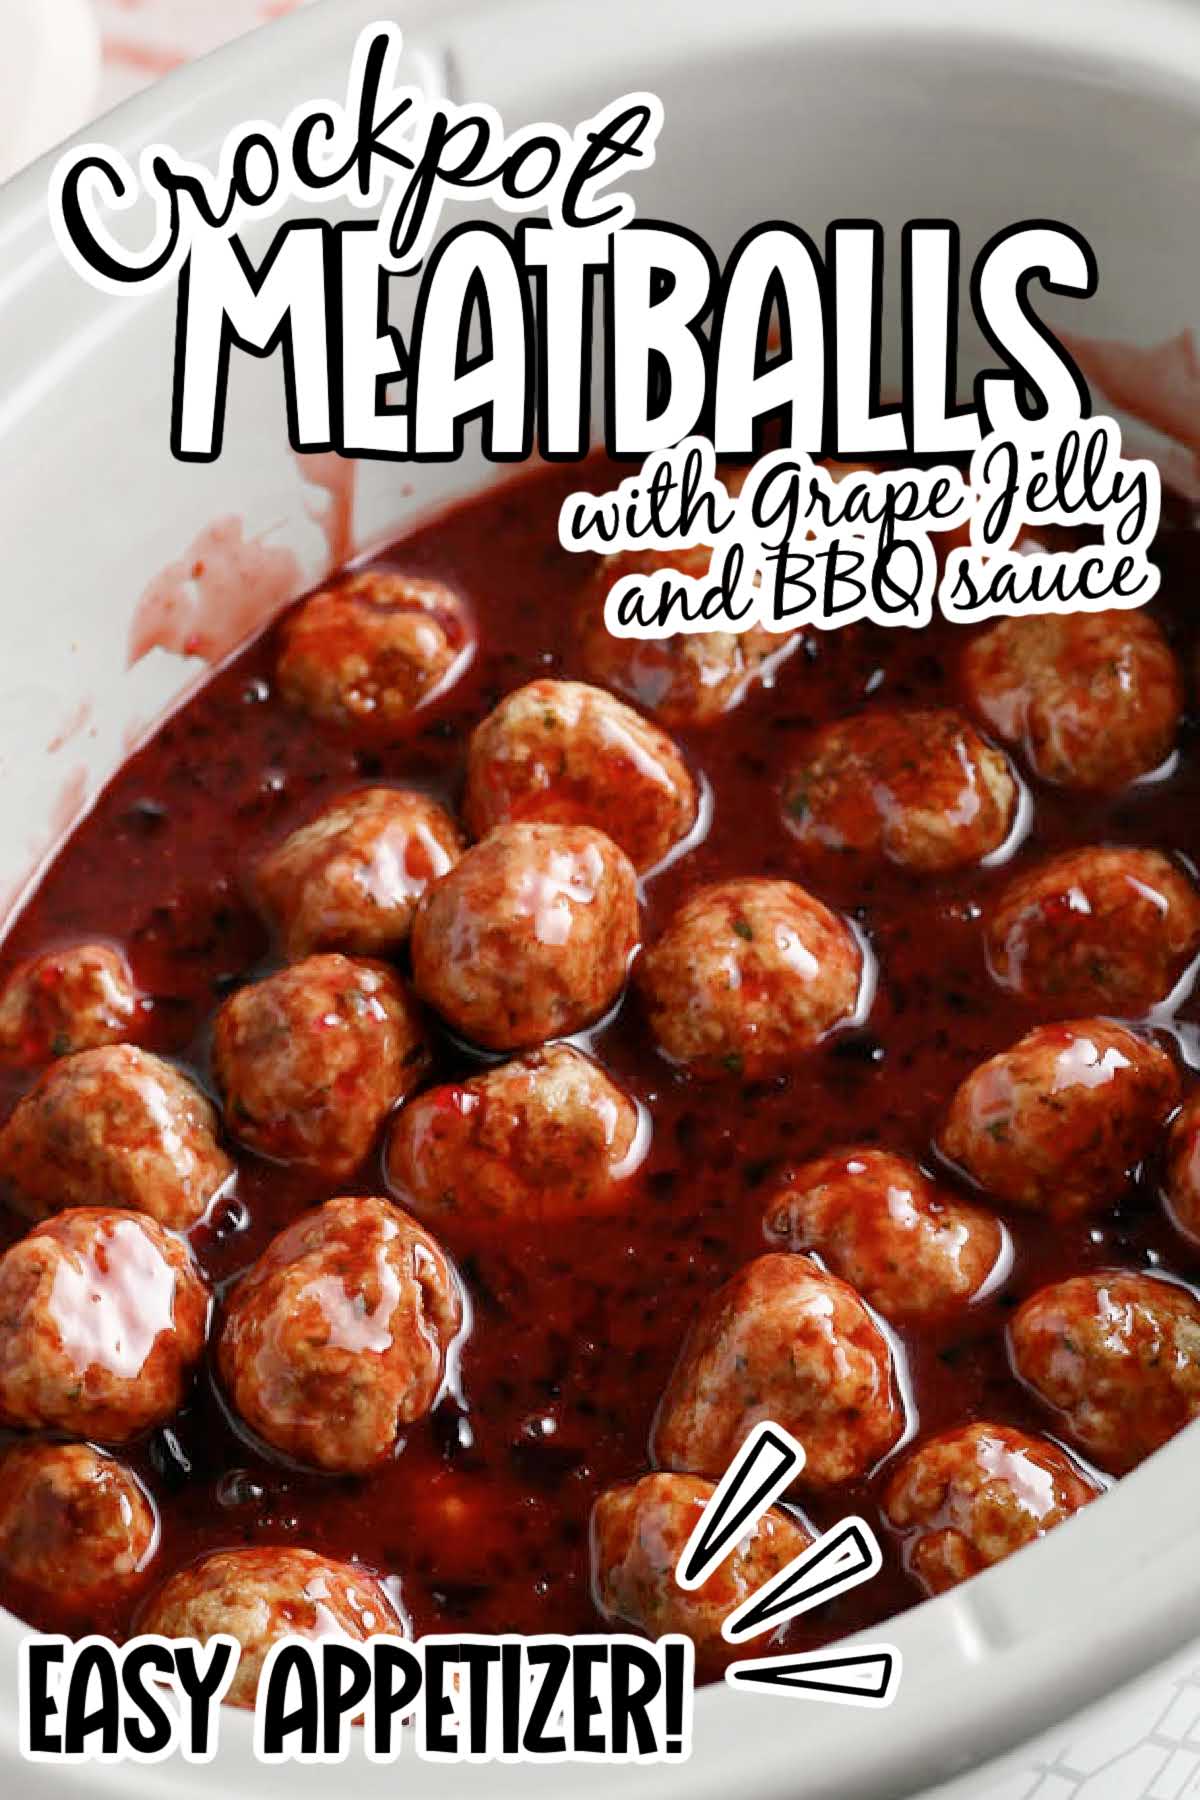 Crockpot meatballs with grape jelly and bbq sauce in a crockpot with text overlay.